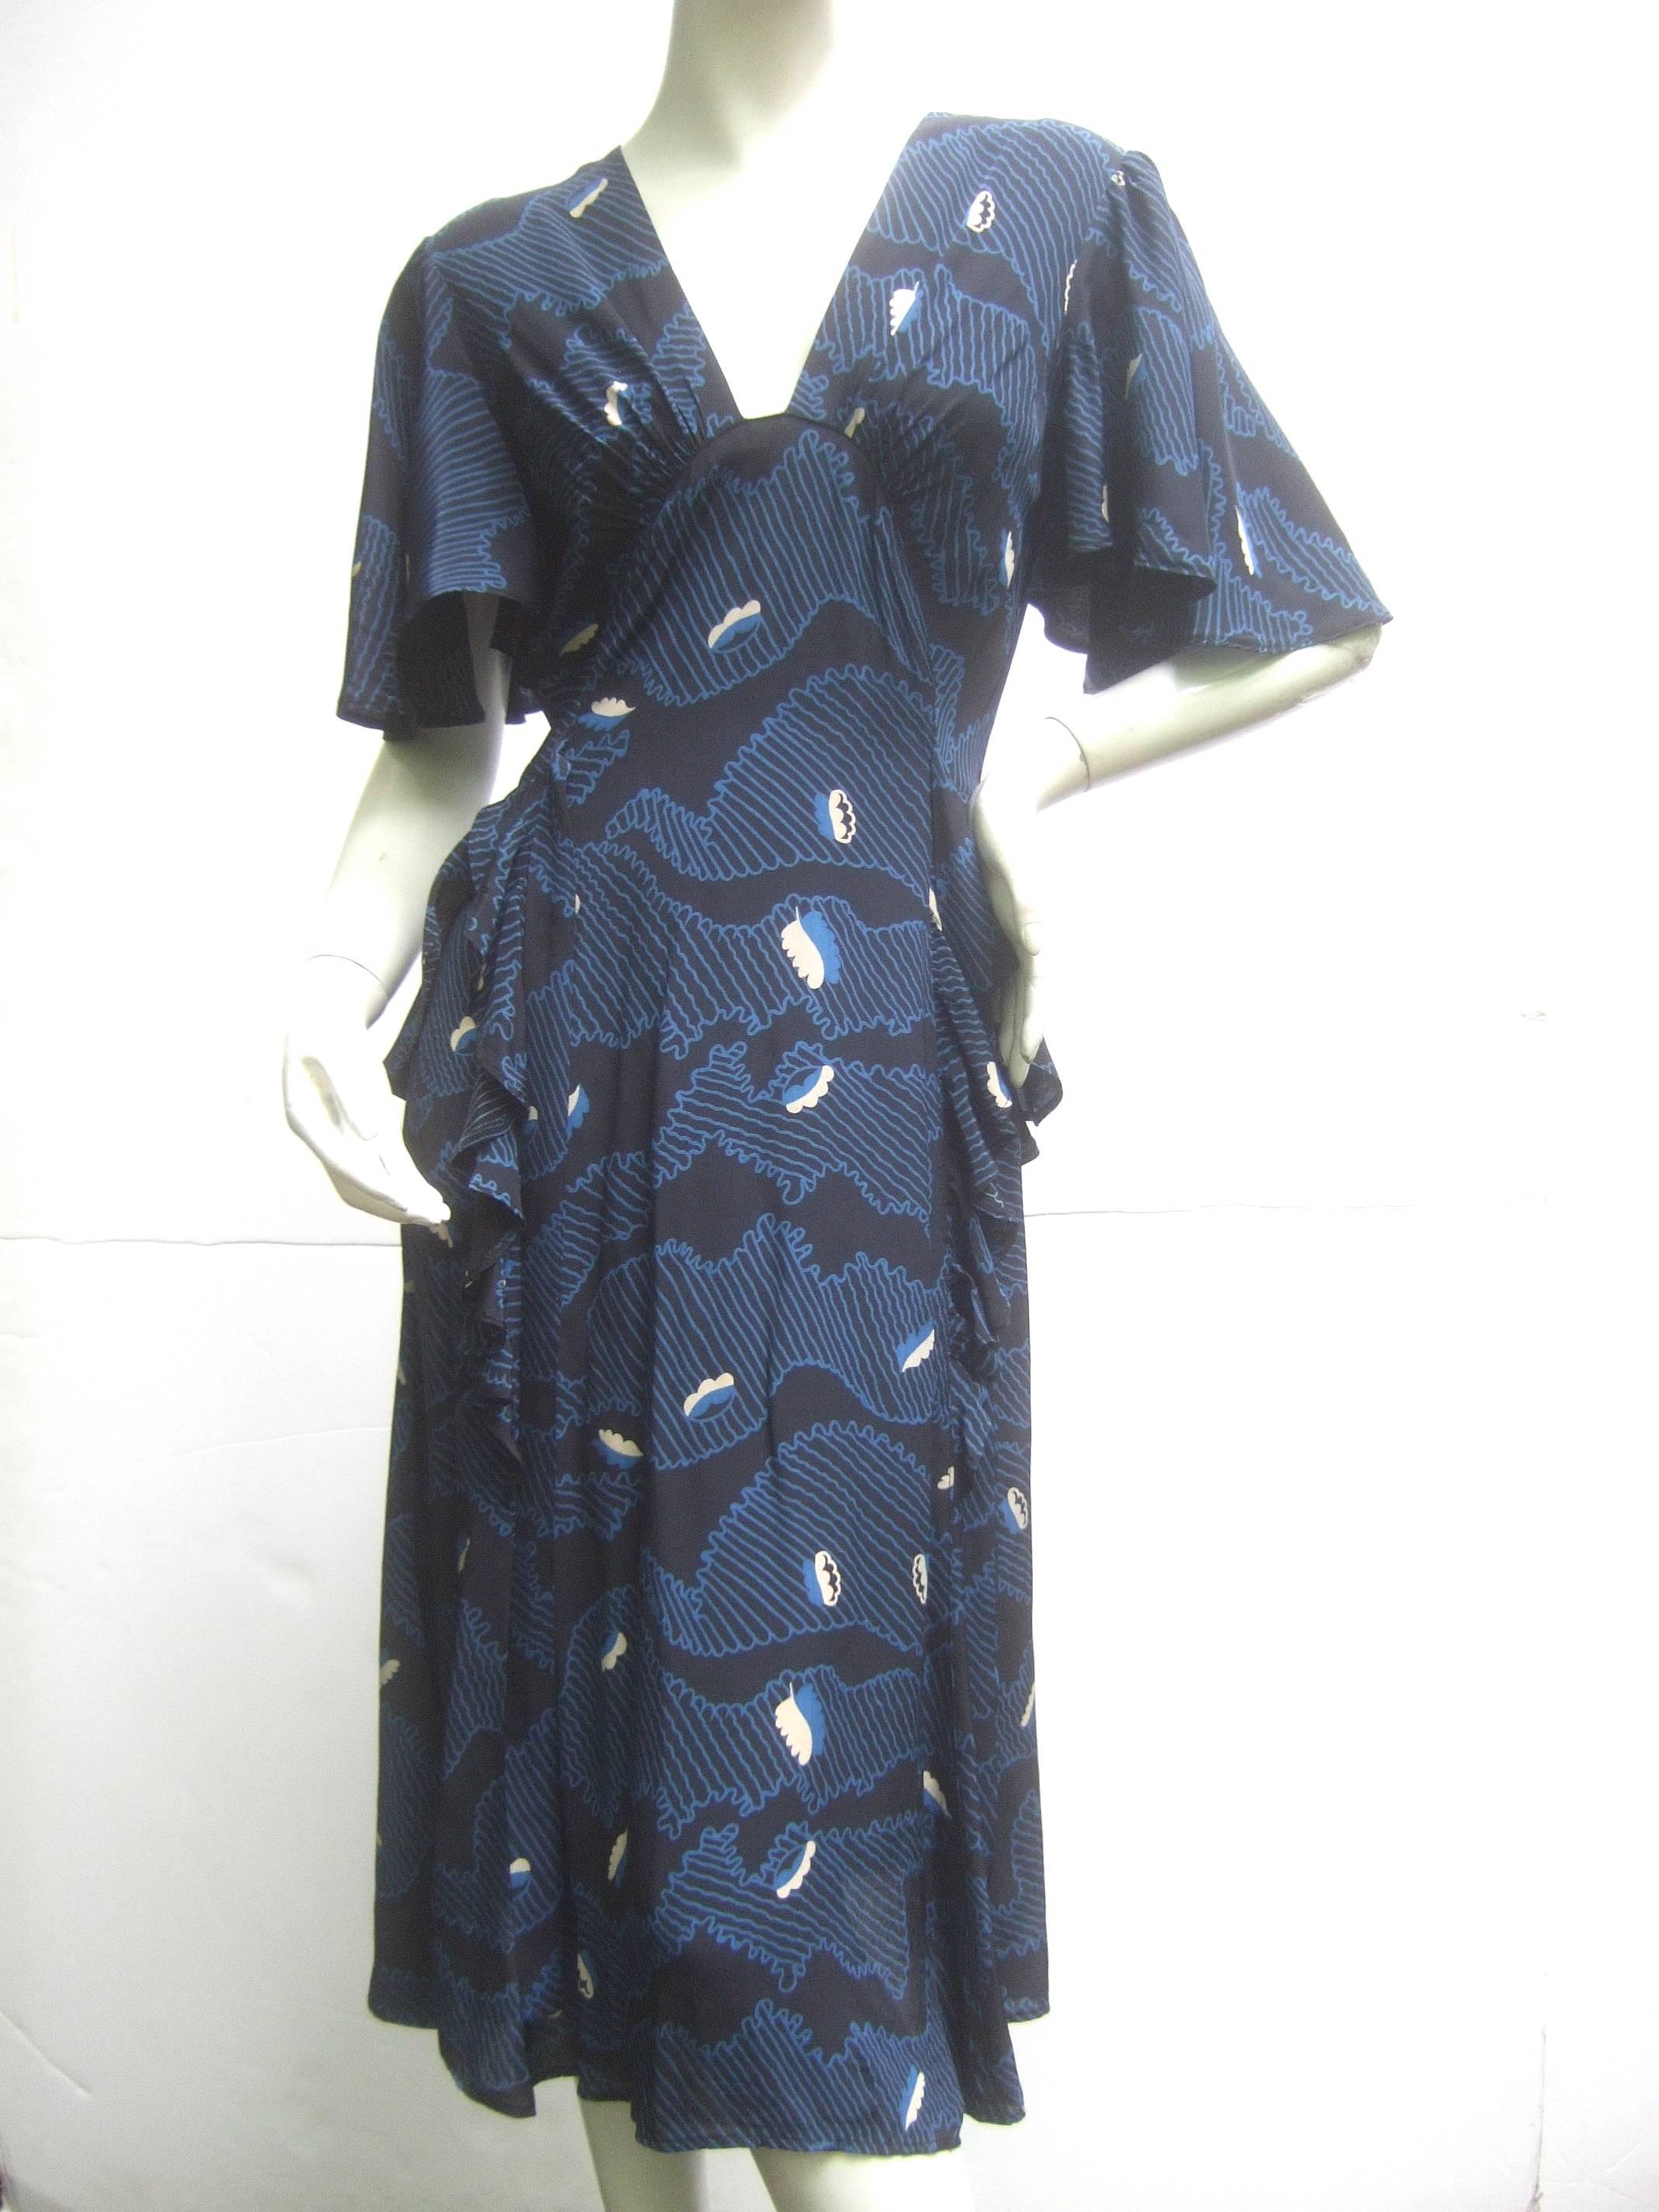 Black Ossie Clark Moss Crepe Dress with Celia Birtwell Fabric. Early 1970's.